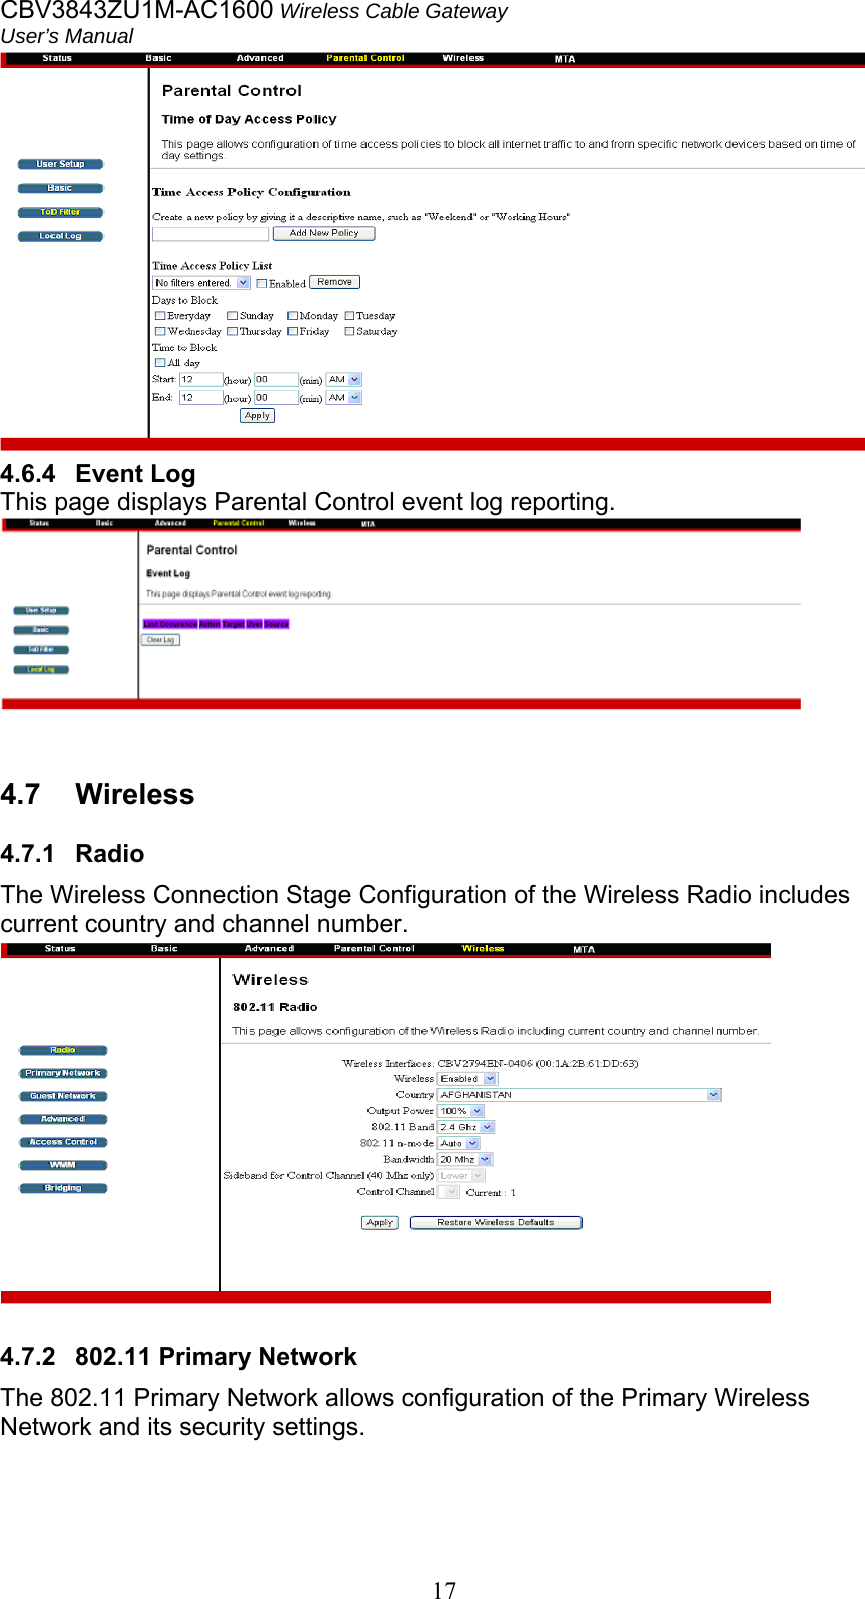 CBV3843ZU1M-AC1600 Wireless Cable Gateway  User’s Manual   17 4.6.4   Event Log  This page displays Parental Control event log reporting.   4.7  Wireless  4.7.1  Radio  The Wireless Connection Stage Configuration of the Wireless Radio includes current country and channel number.   4.7.2  802.11 Primary Network  The 802.11 Primary Network allows configuration of the Primary Wireless Network and its security settings.  